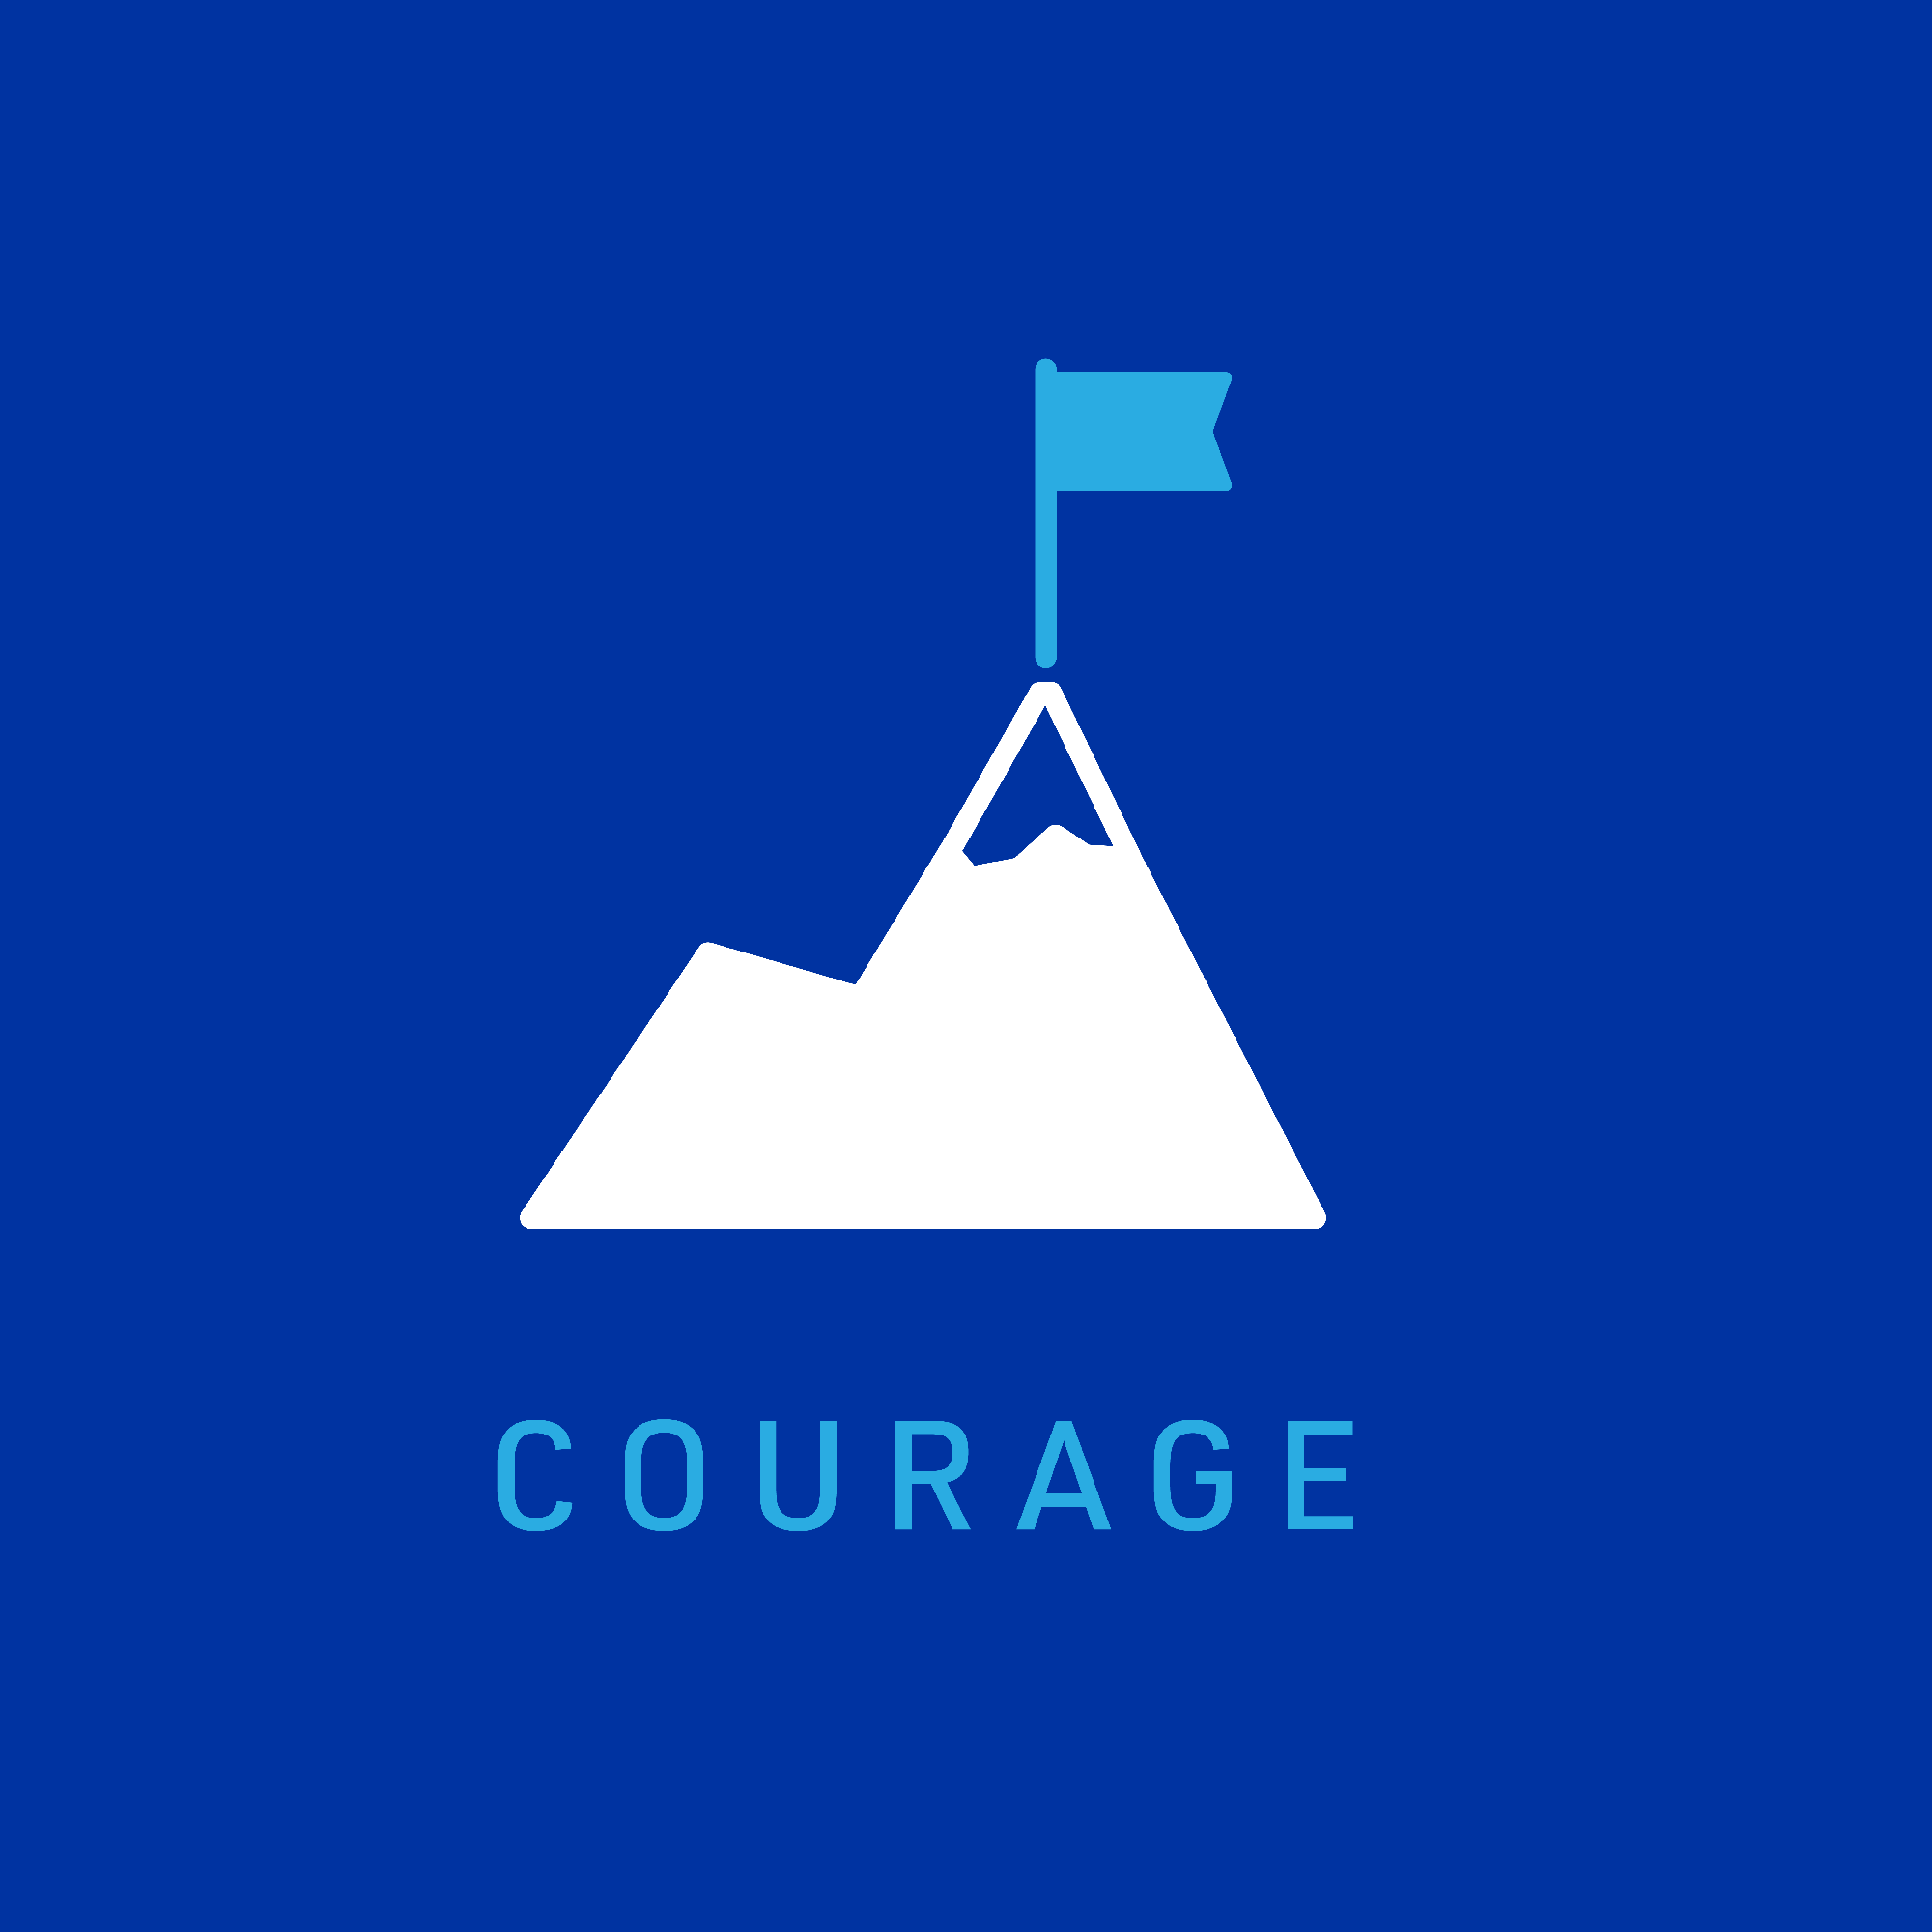 A square graphic of a mountain ridgeline with a flag planted on the uppermost peak